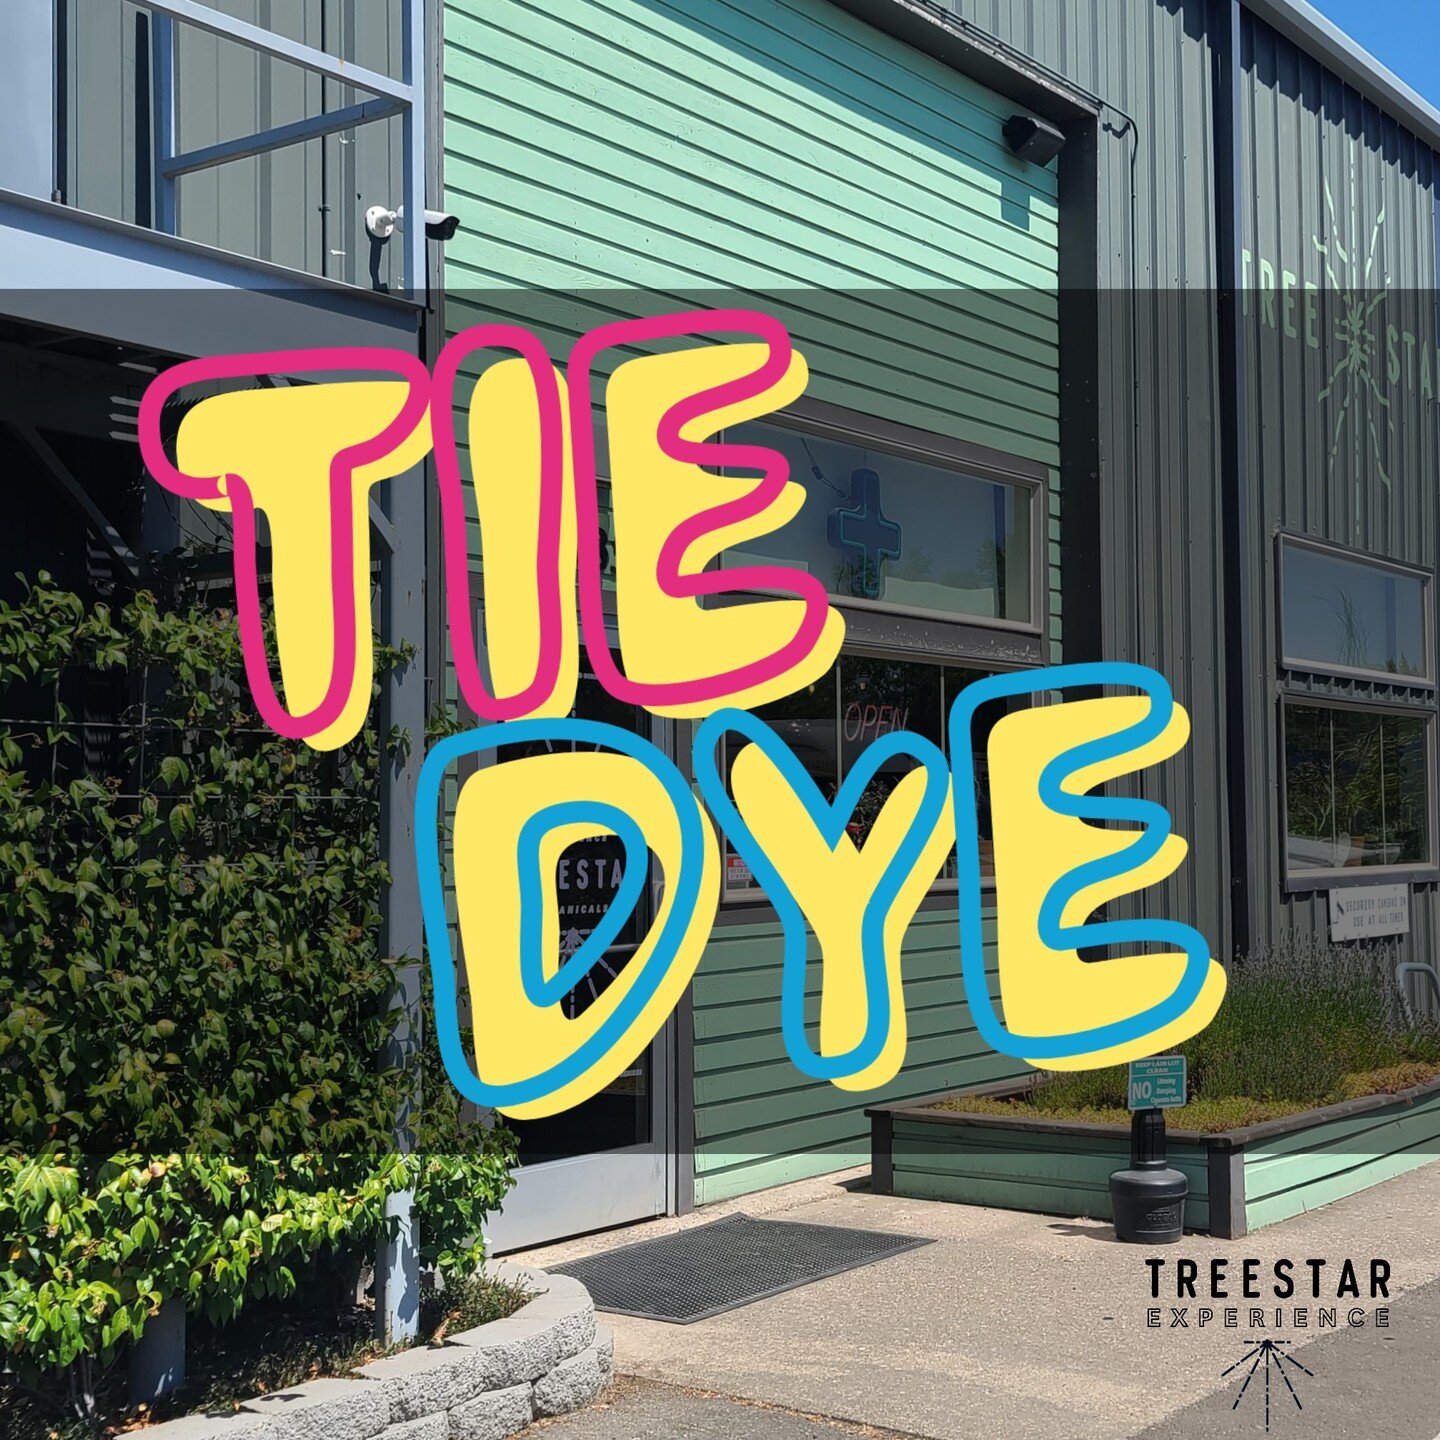 TOMORROW Treestar's Tie Dye Experience is here from 2pm-5pm! 🎉

Your white Treestar shirt will be your ticket to tie dye, so purchase a shirt inside to tie dye it with us outside. 🌞
Can't wait to see you there! #treestar 

PS. Tie dye is fun for ev